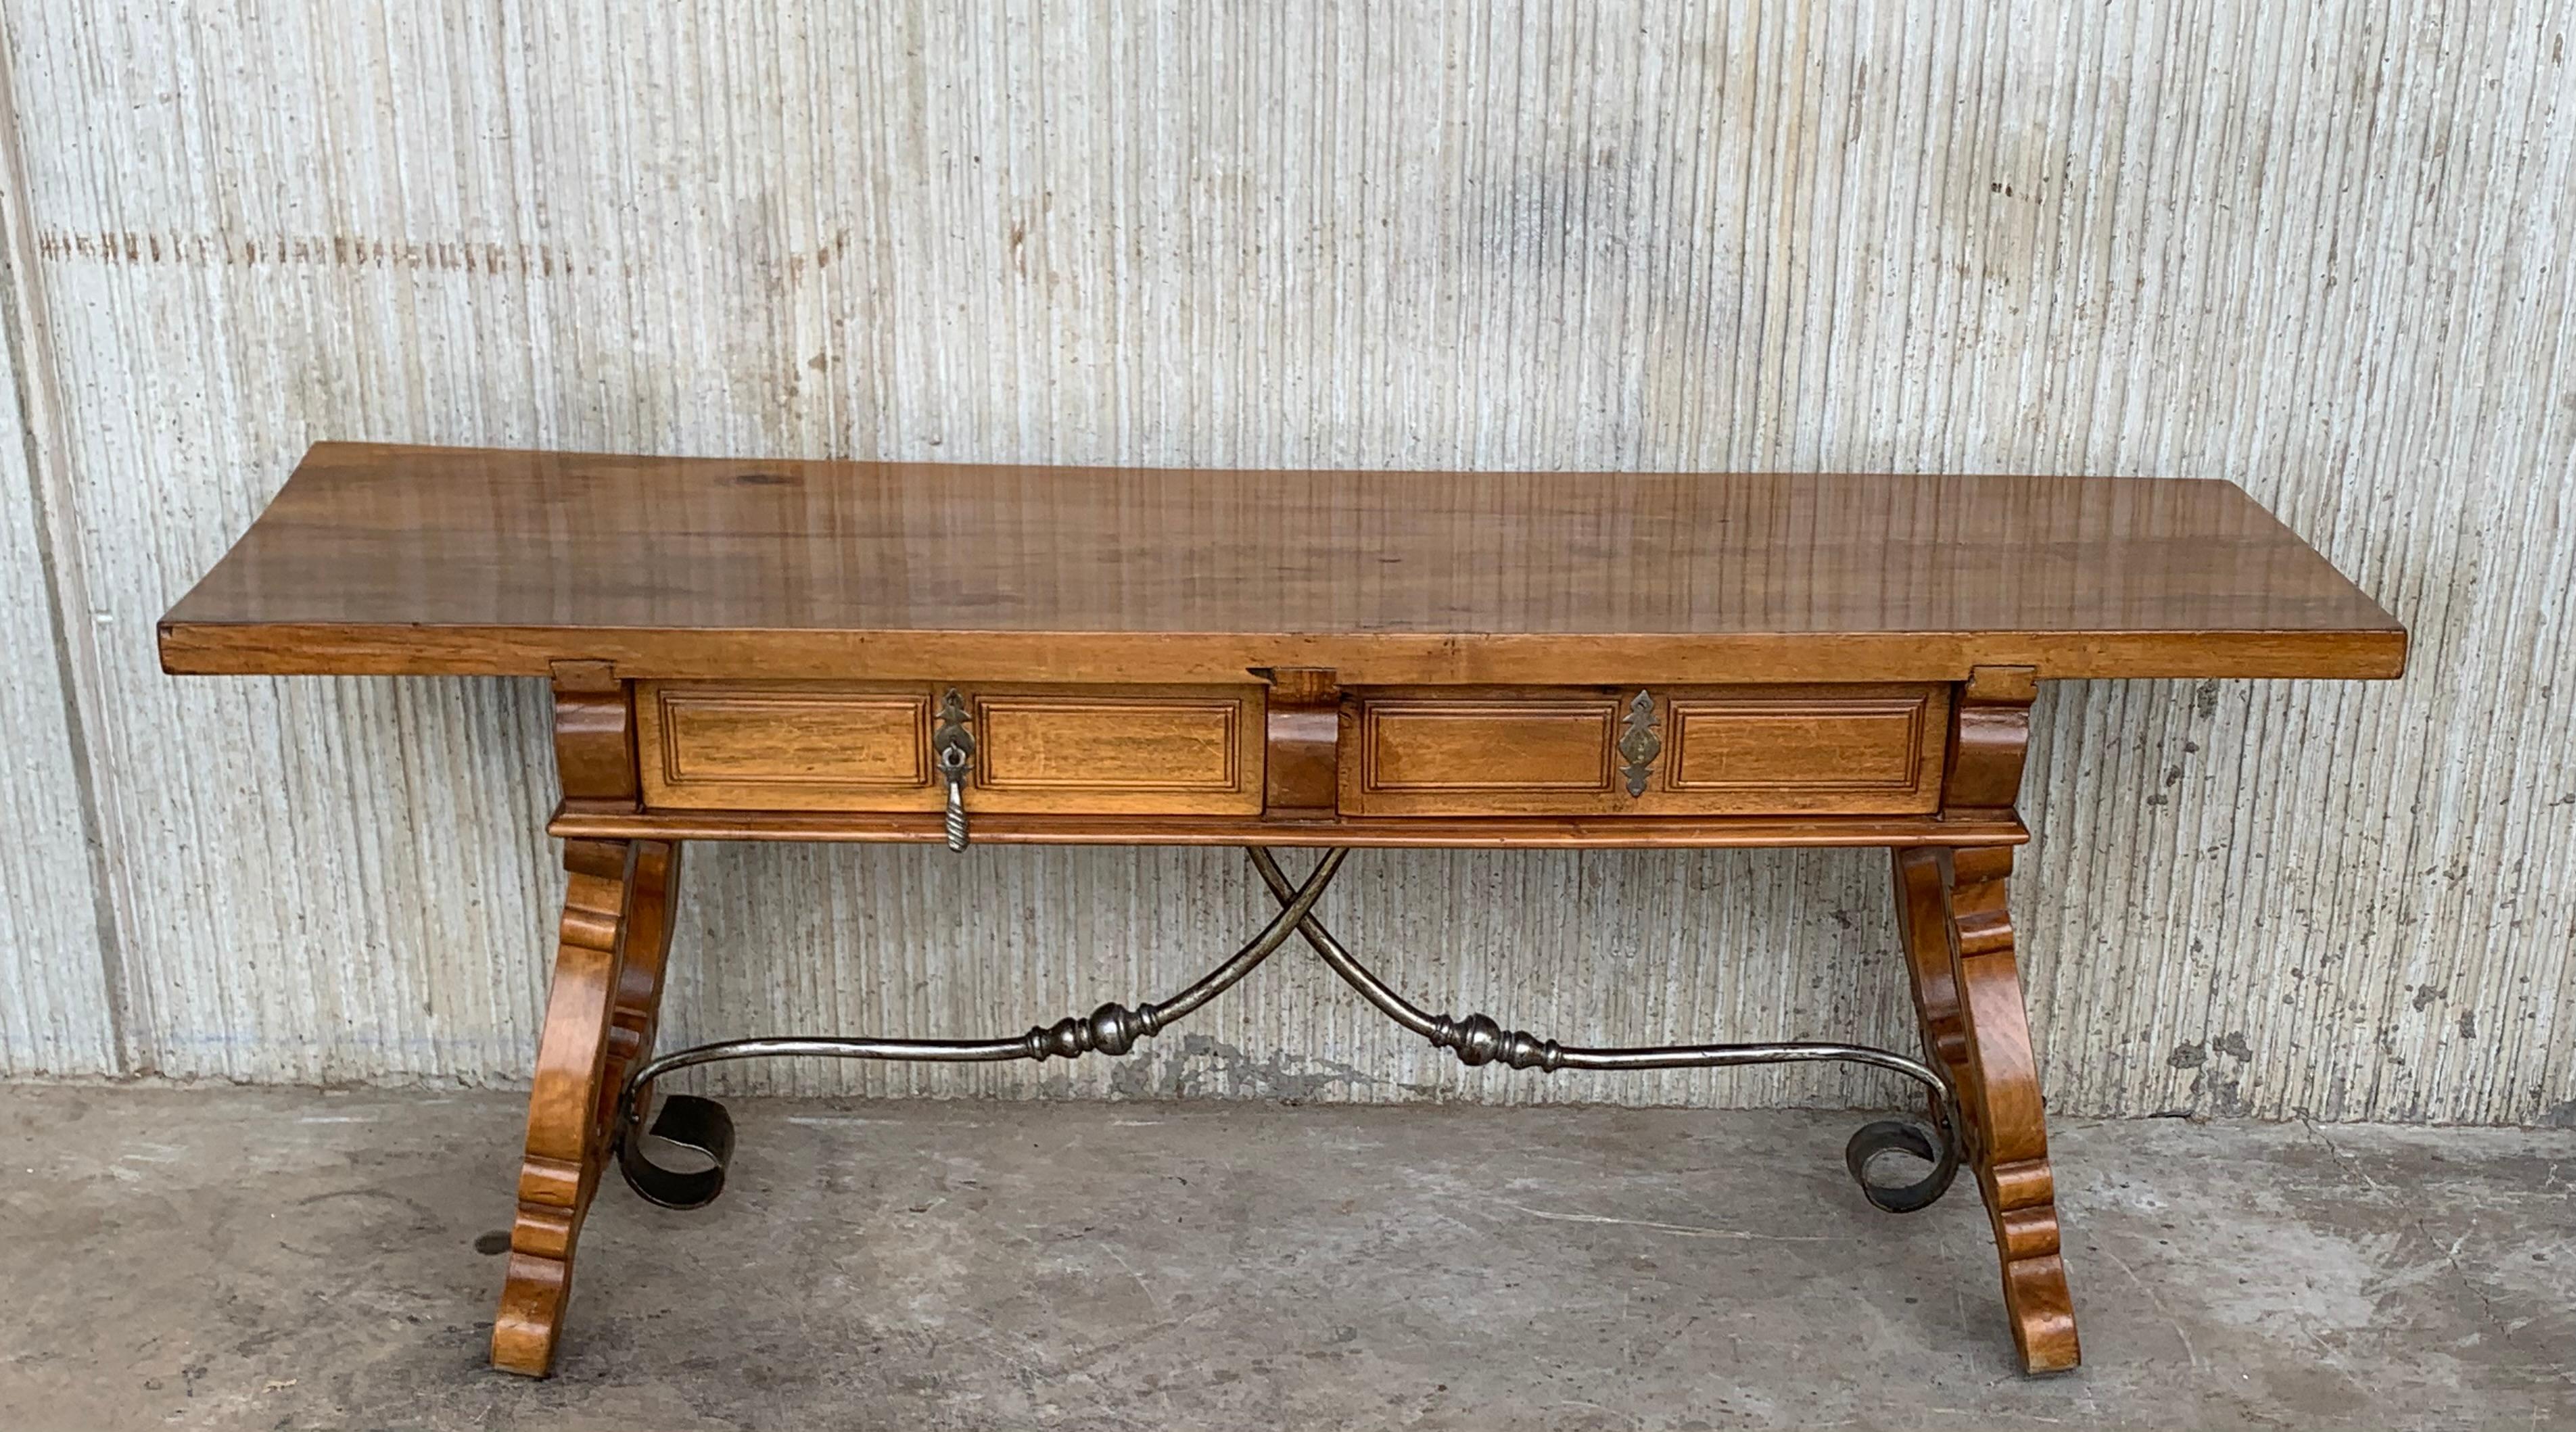 19th century Spanish bench or low console table with carved lye legs in two side of both legs.
Original iron pull hardware and heavy and rare iron stretcher
That back has the same picture than the front (without drawers).